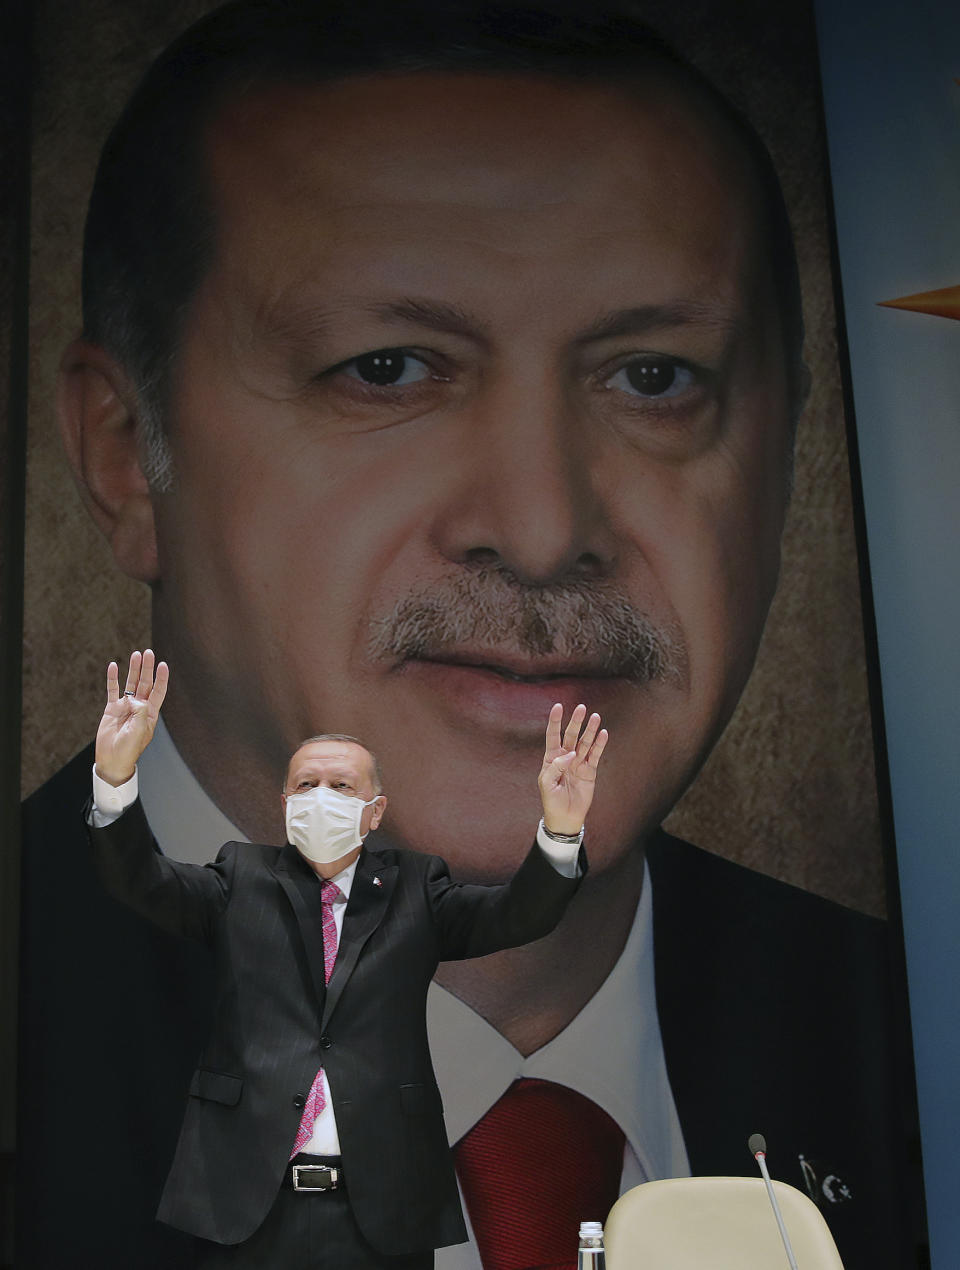 Turkey's President Recep Tayyip Erdogan gestures as he addresses his party members, in Ankara, Turkey, Thursday, Aug. 13, 2020. Greece’s prime minister has warmly thanked France for its decision to boost its military presence in the eastern Mediterranean, where Greek and Turkish warships are closely shadowing each other over a Turkish energy exploration bid in waters Athens claims as its own. (Turkish Presidency via AP, Pool)